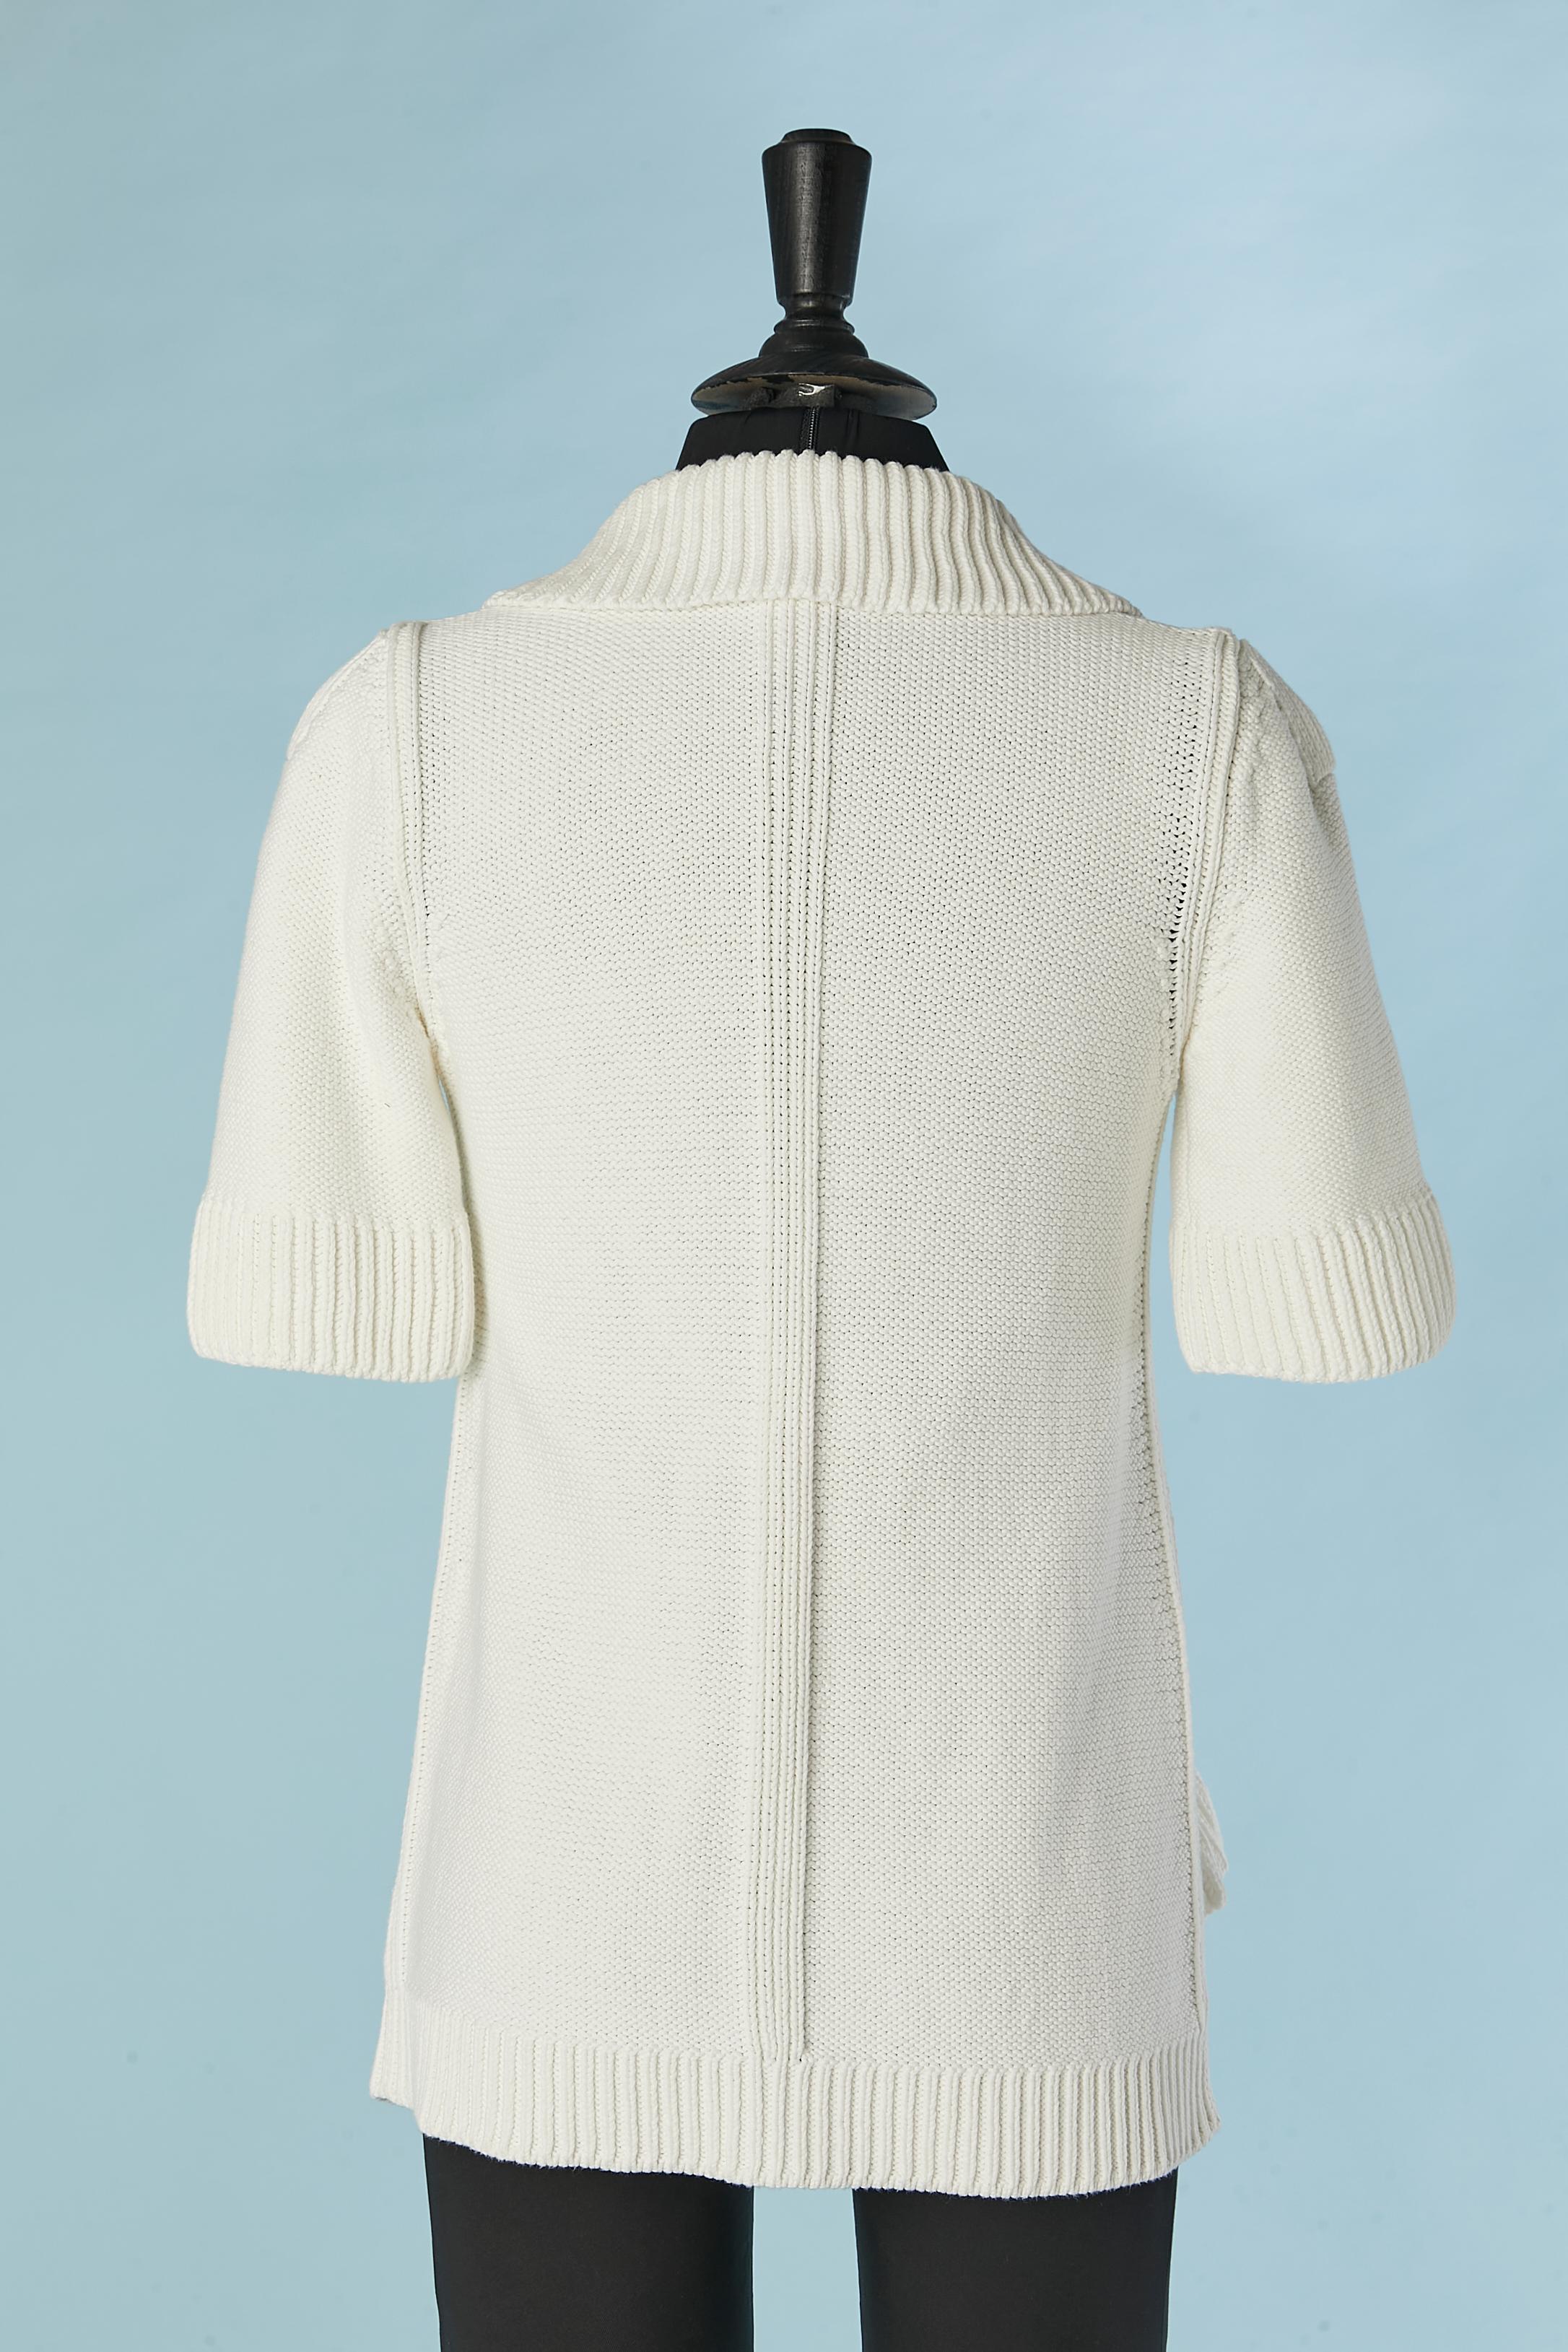 Knit cotton cardigan with short sleeves Sonia Rykiel  For Sale 3